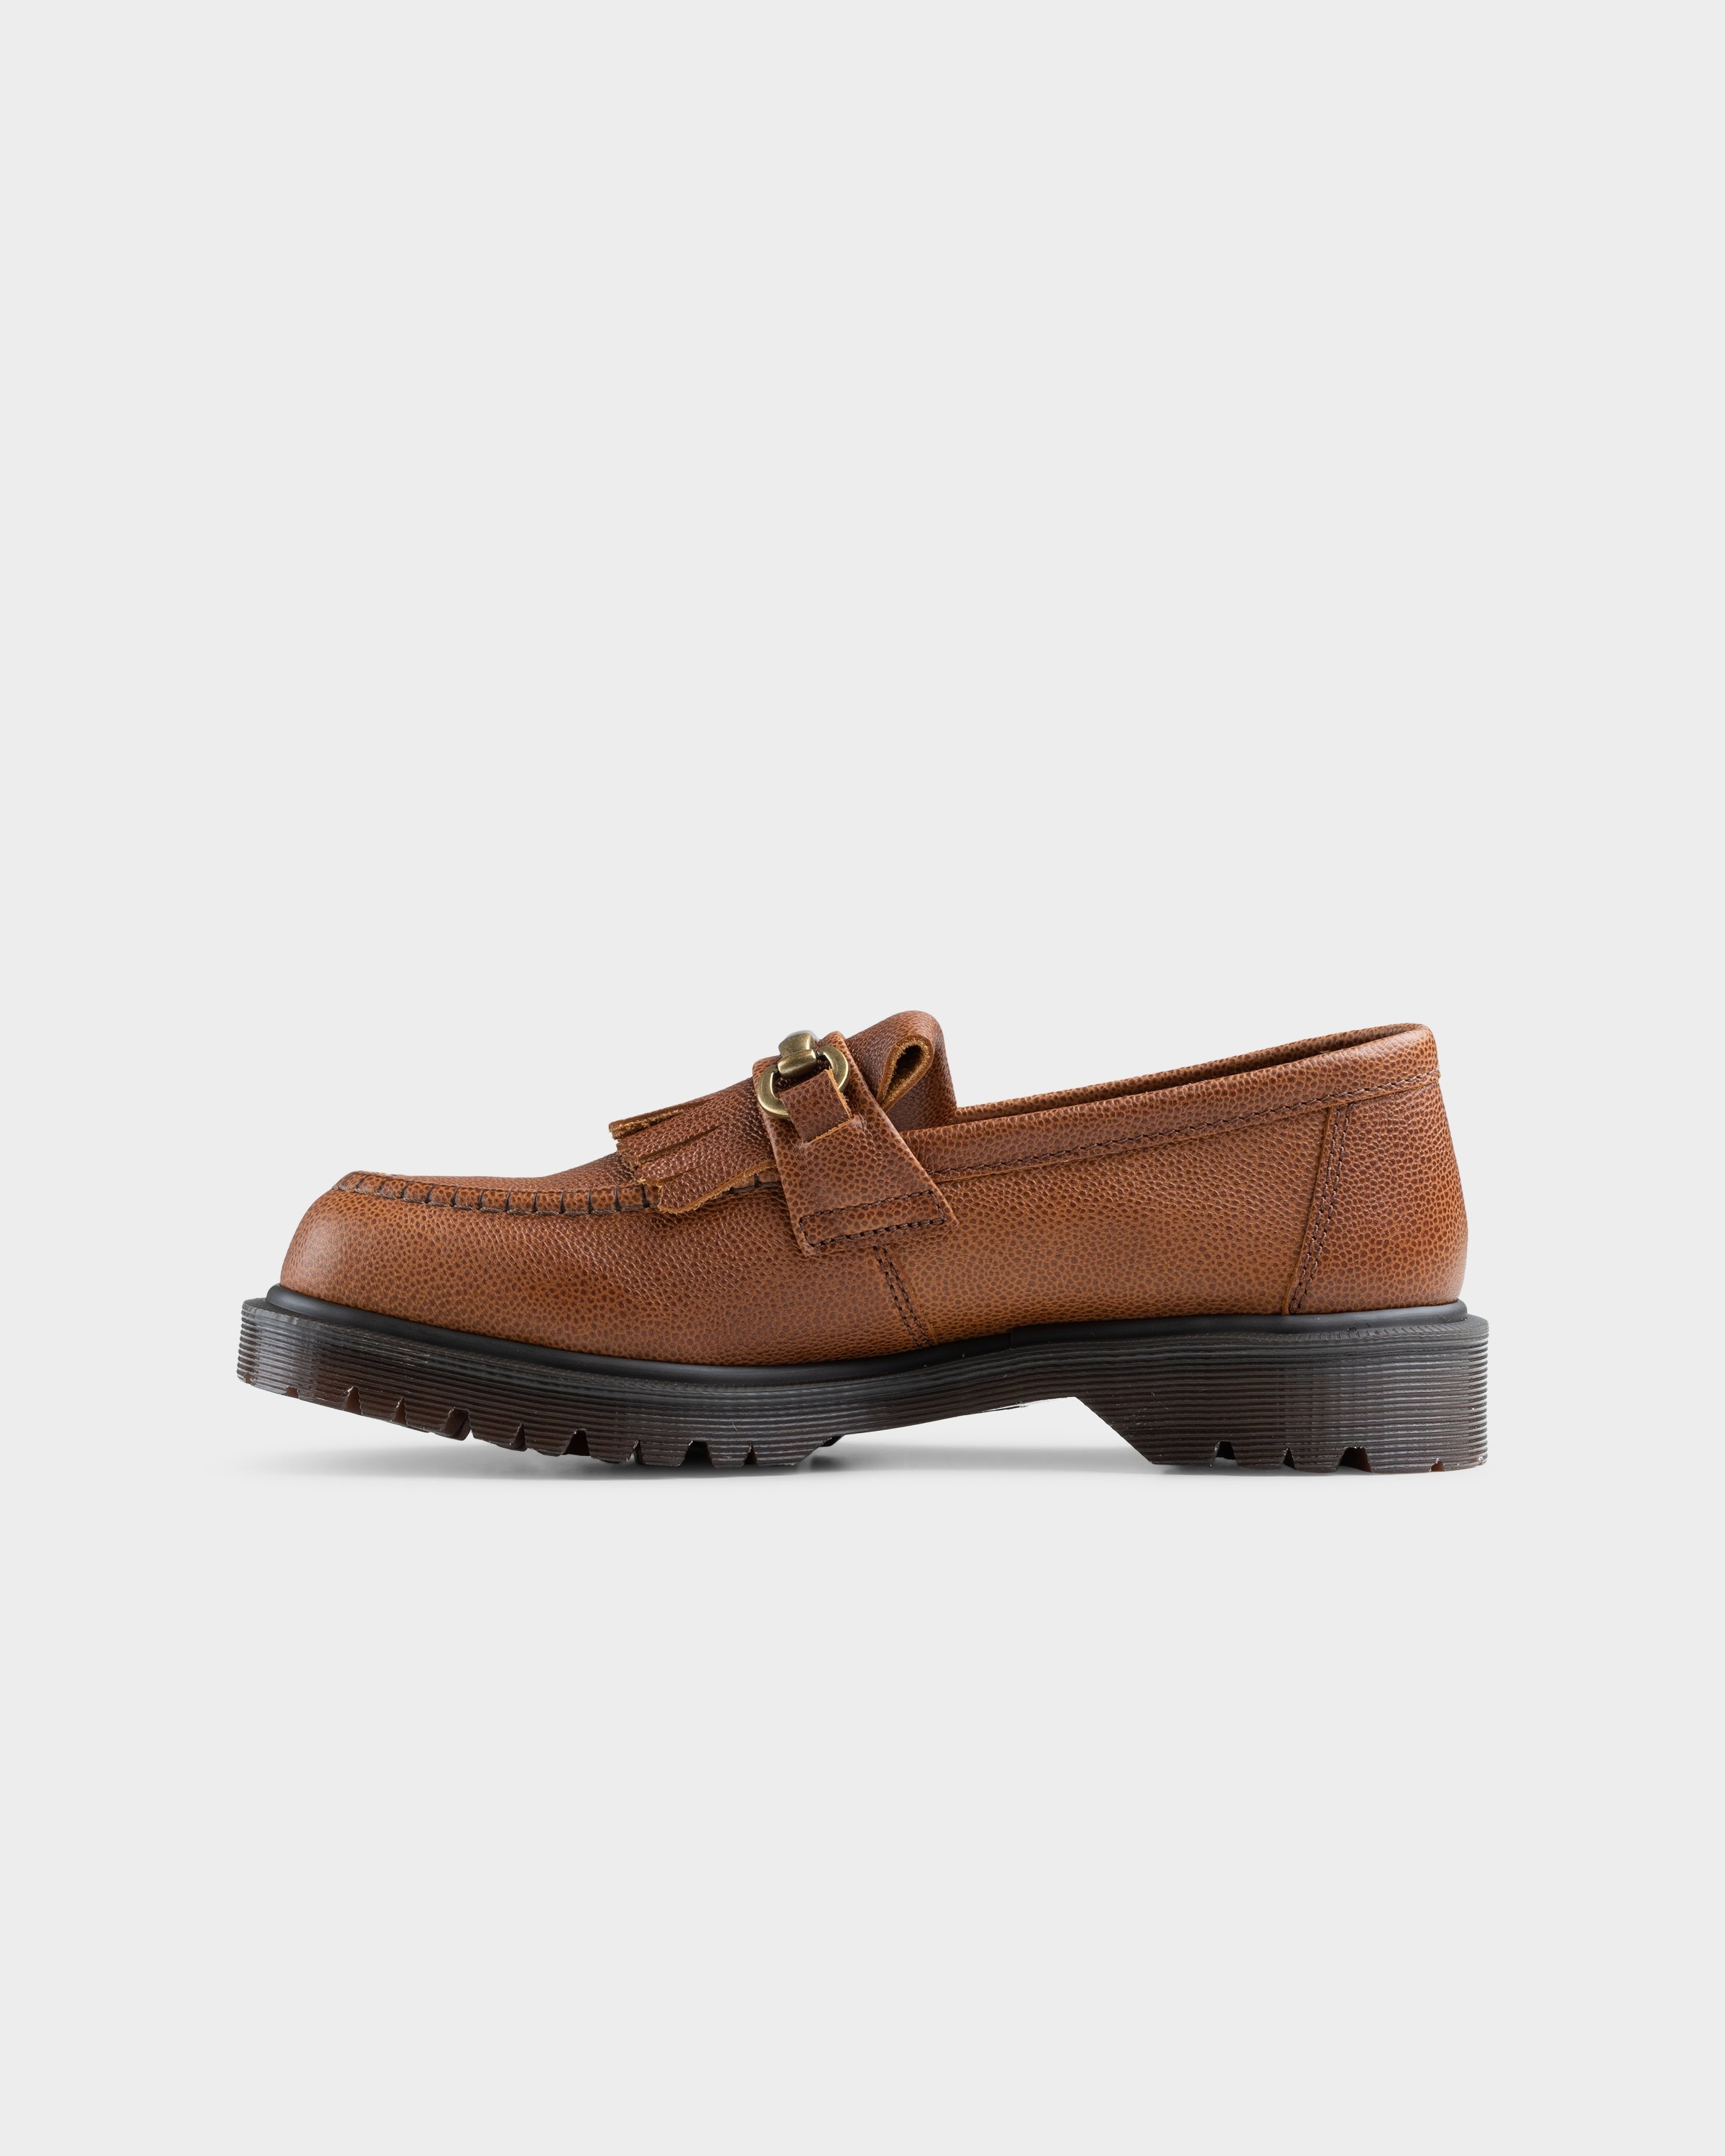 Dr. Martens – Adrian Snaffle Westminster Brown - Shoes - Brown - Image 2